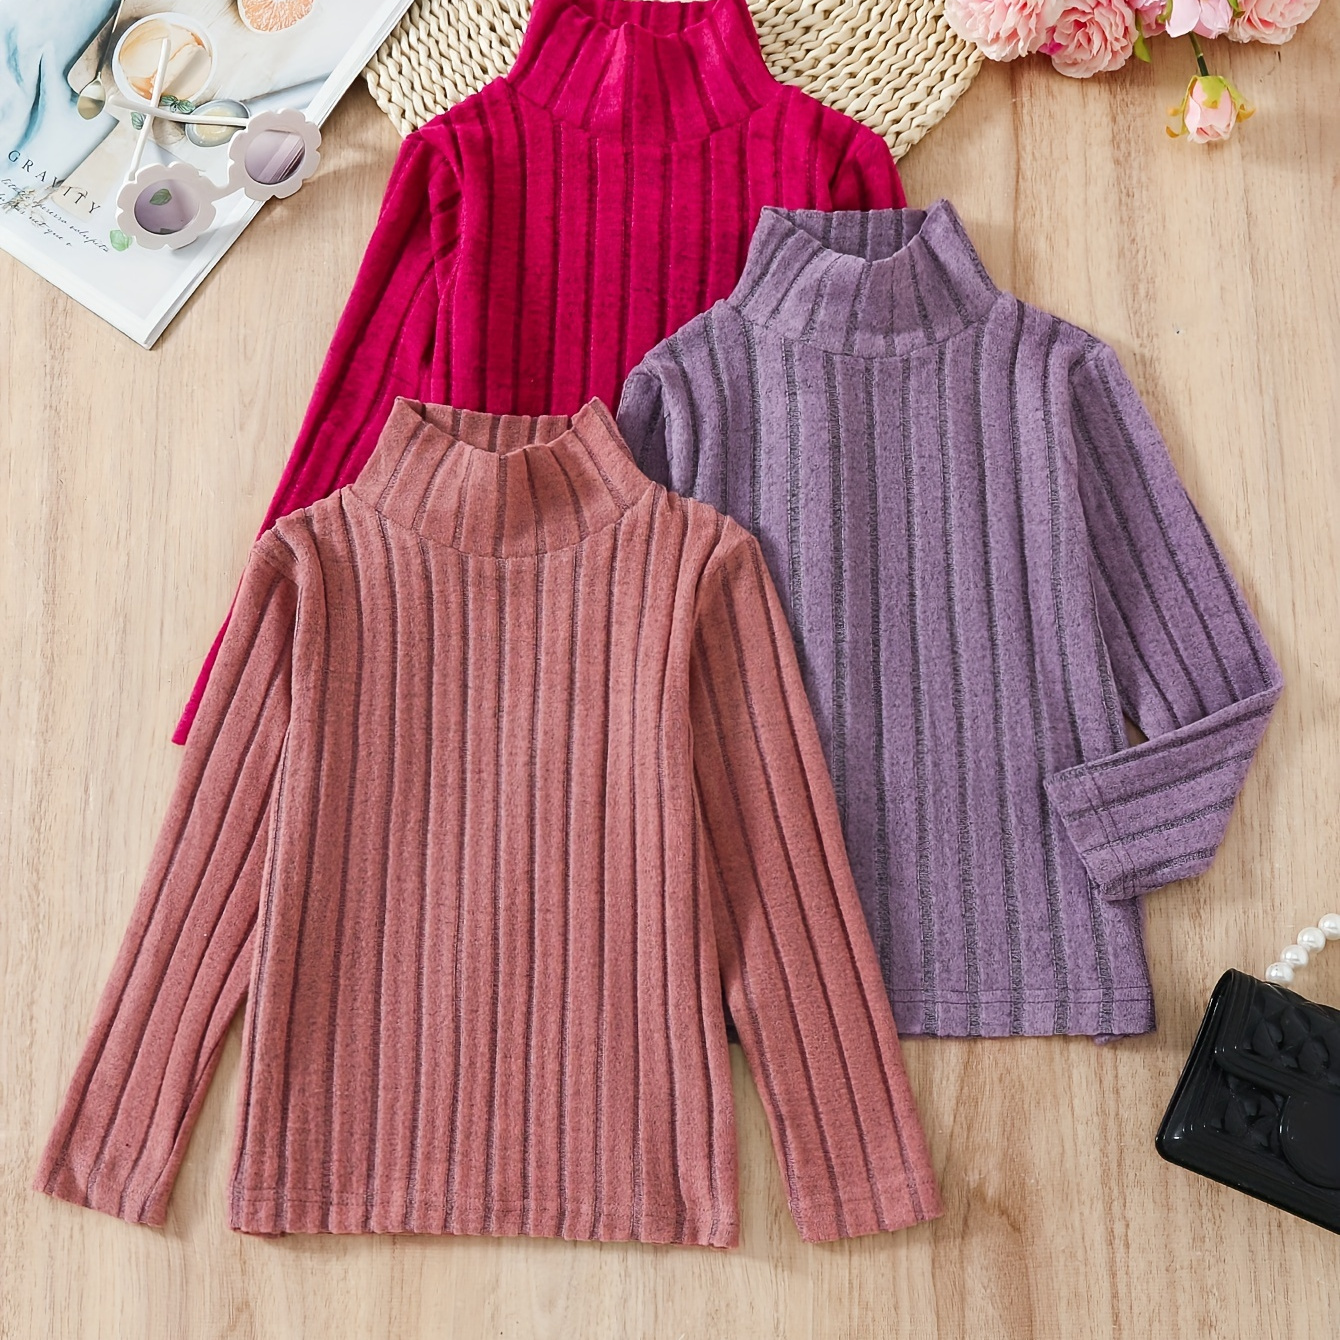 

3pcs Girls Basic Layer Tops Mock Neck Long Sleeve Tees, Comfy Warm Ribbed Knit Sweater Tee For Daily